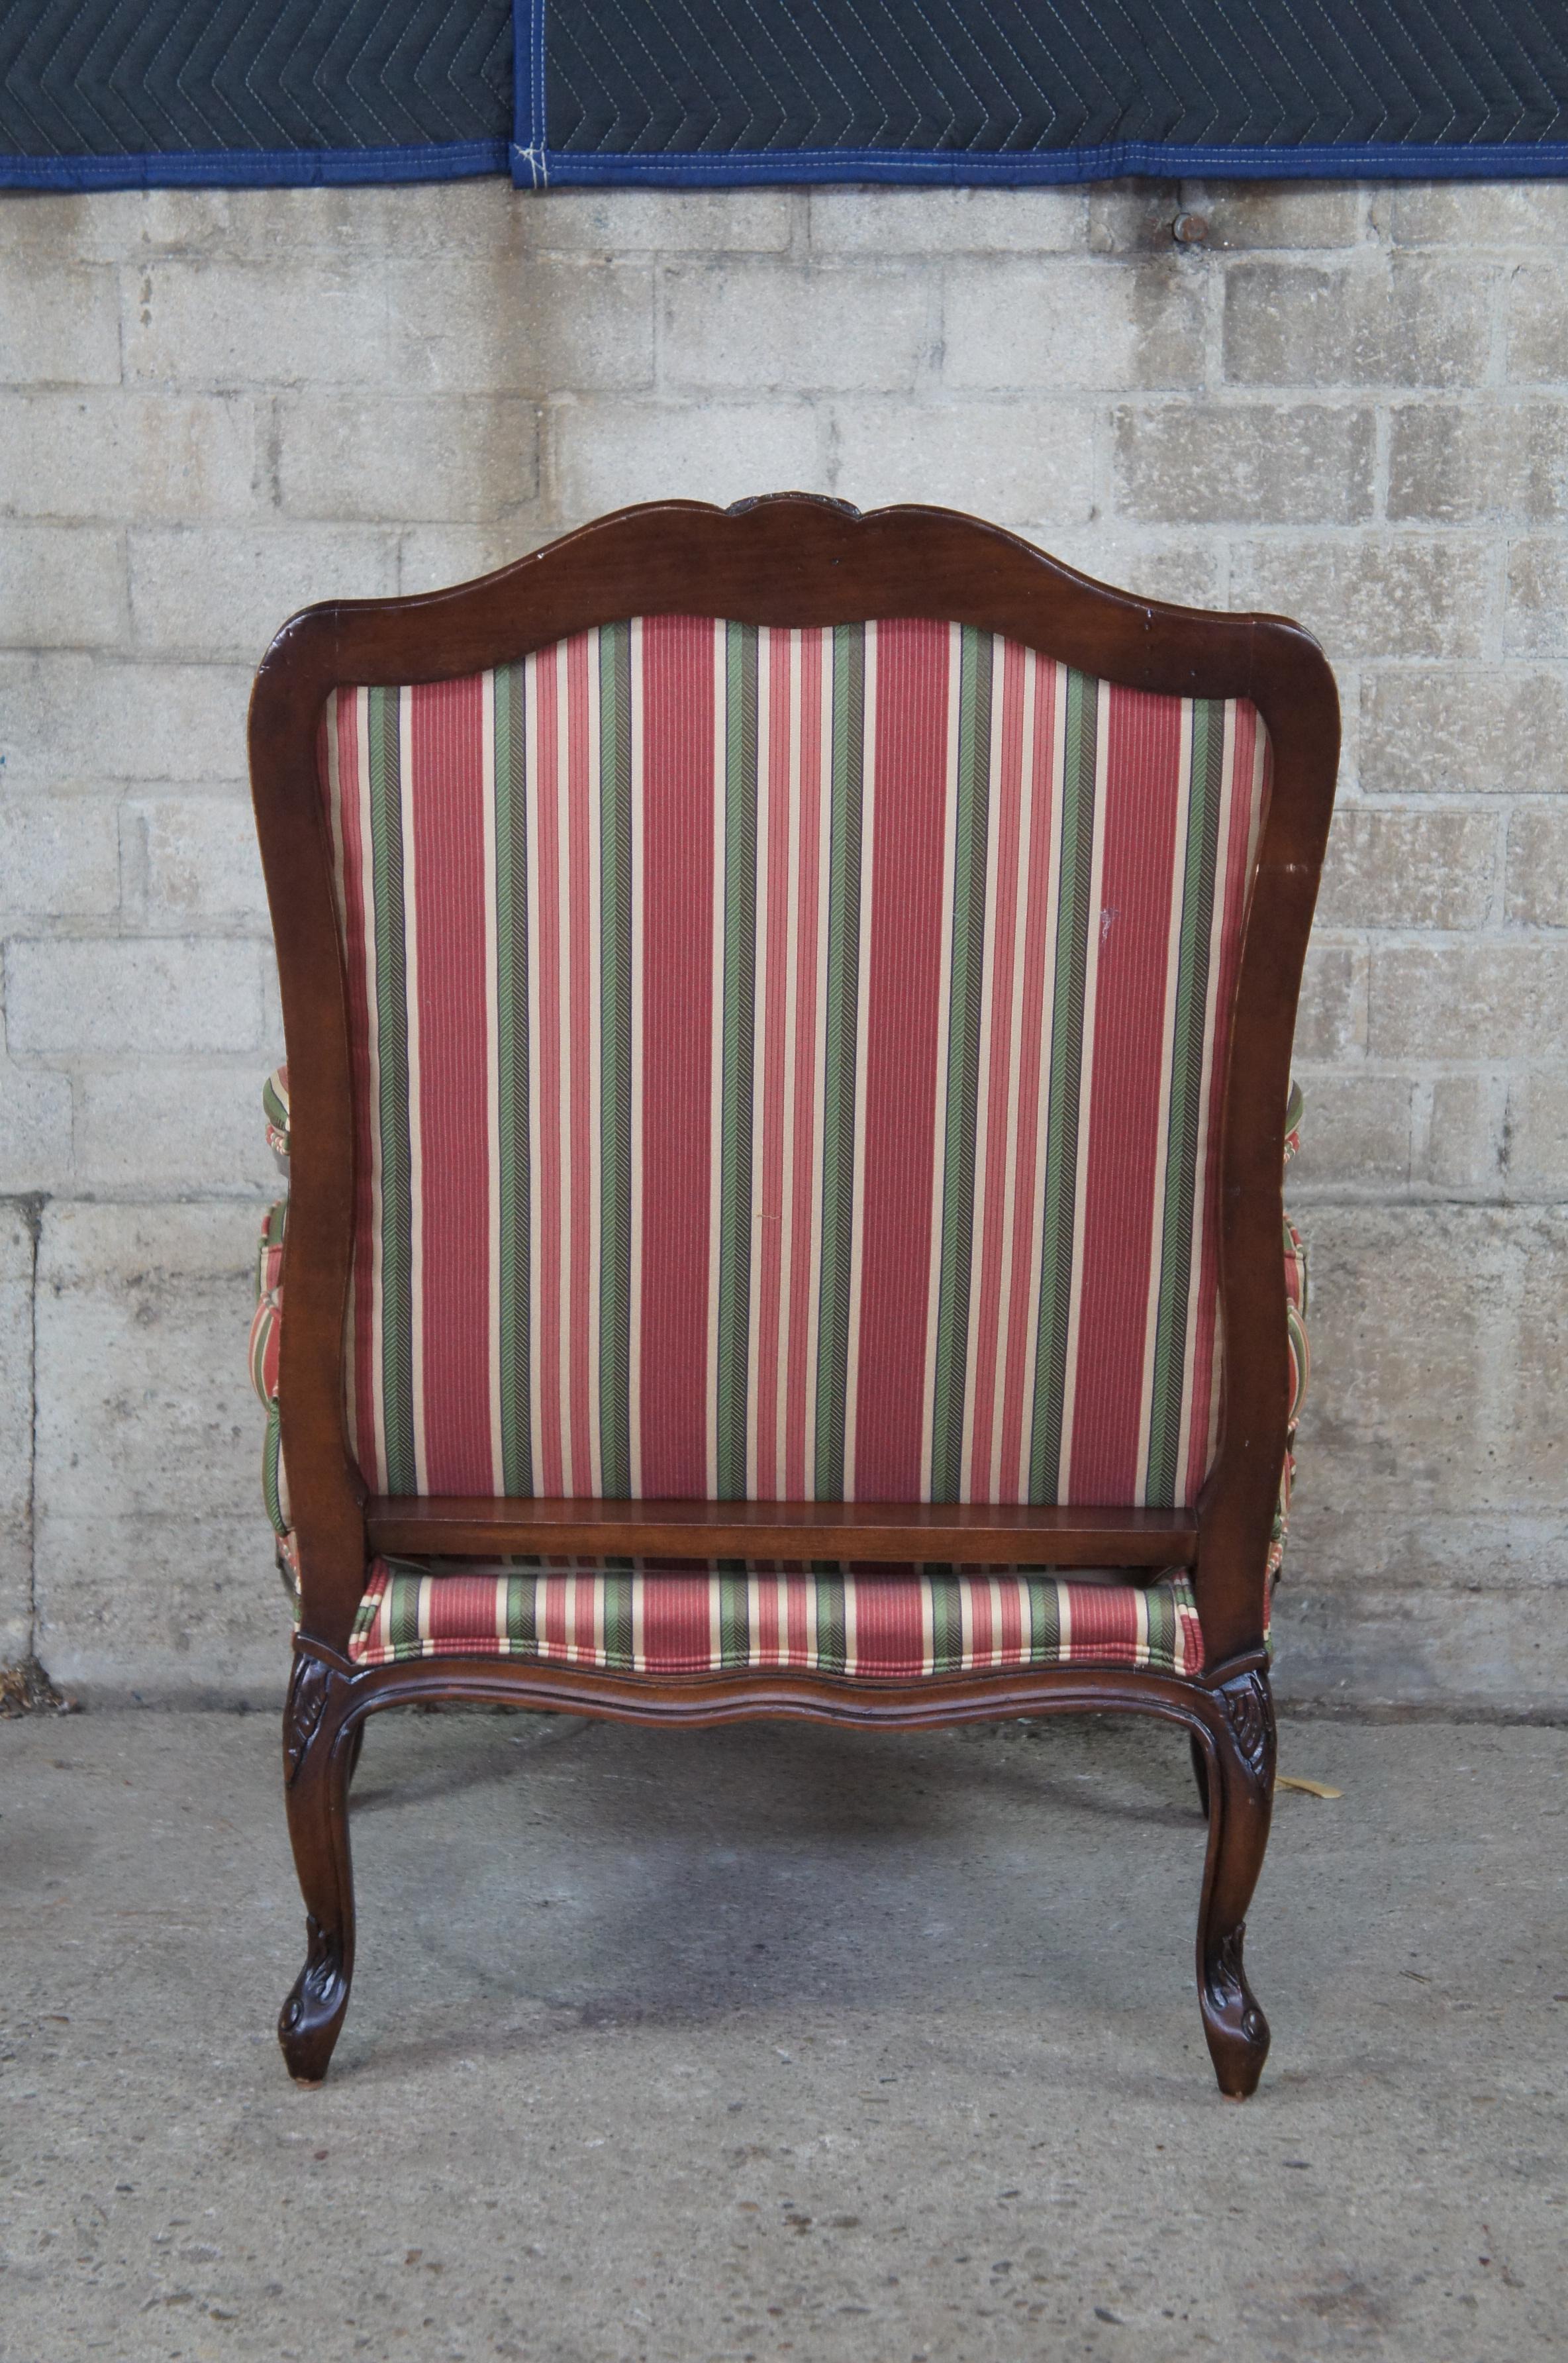 Vintage French Louis XV Walnut Fauteuil Library Arm Chair Striped Upholstery 1